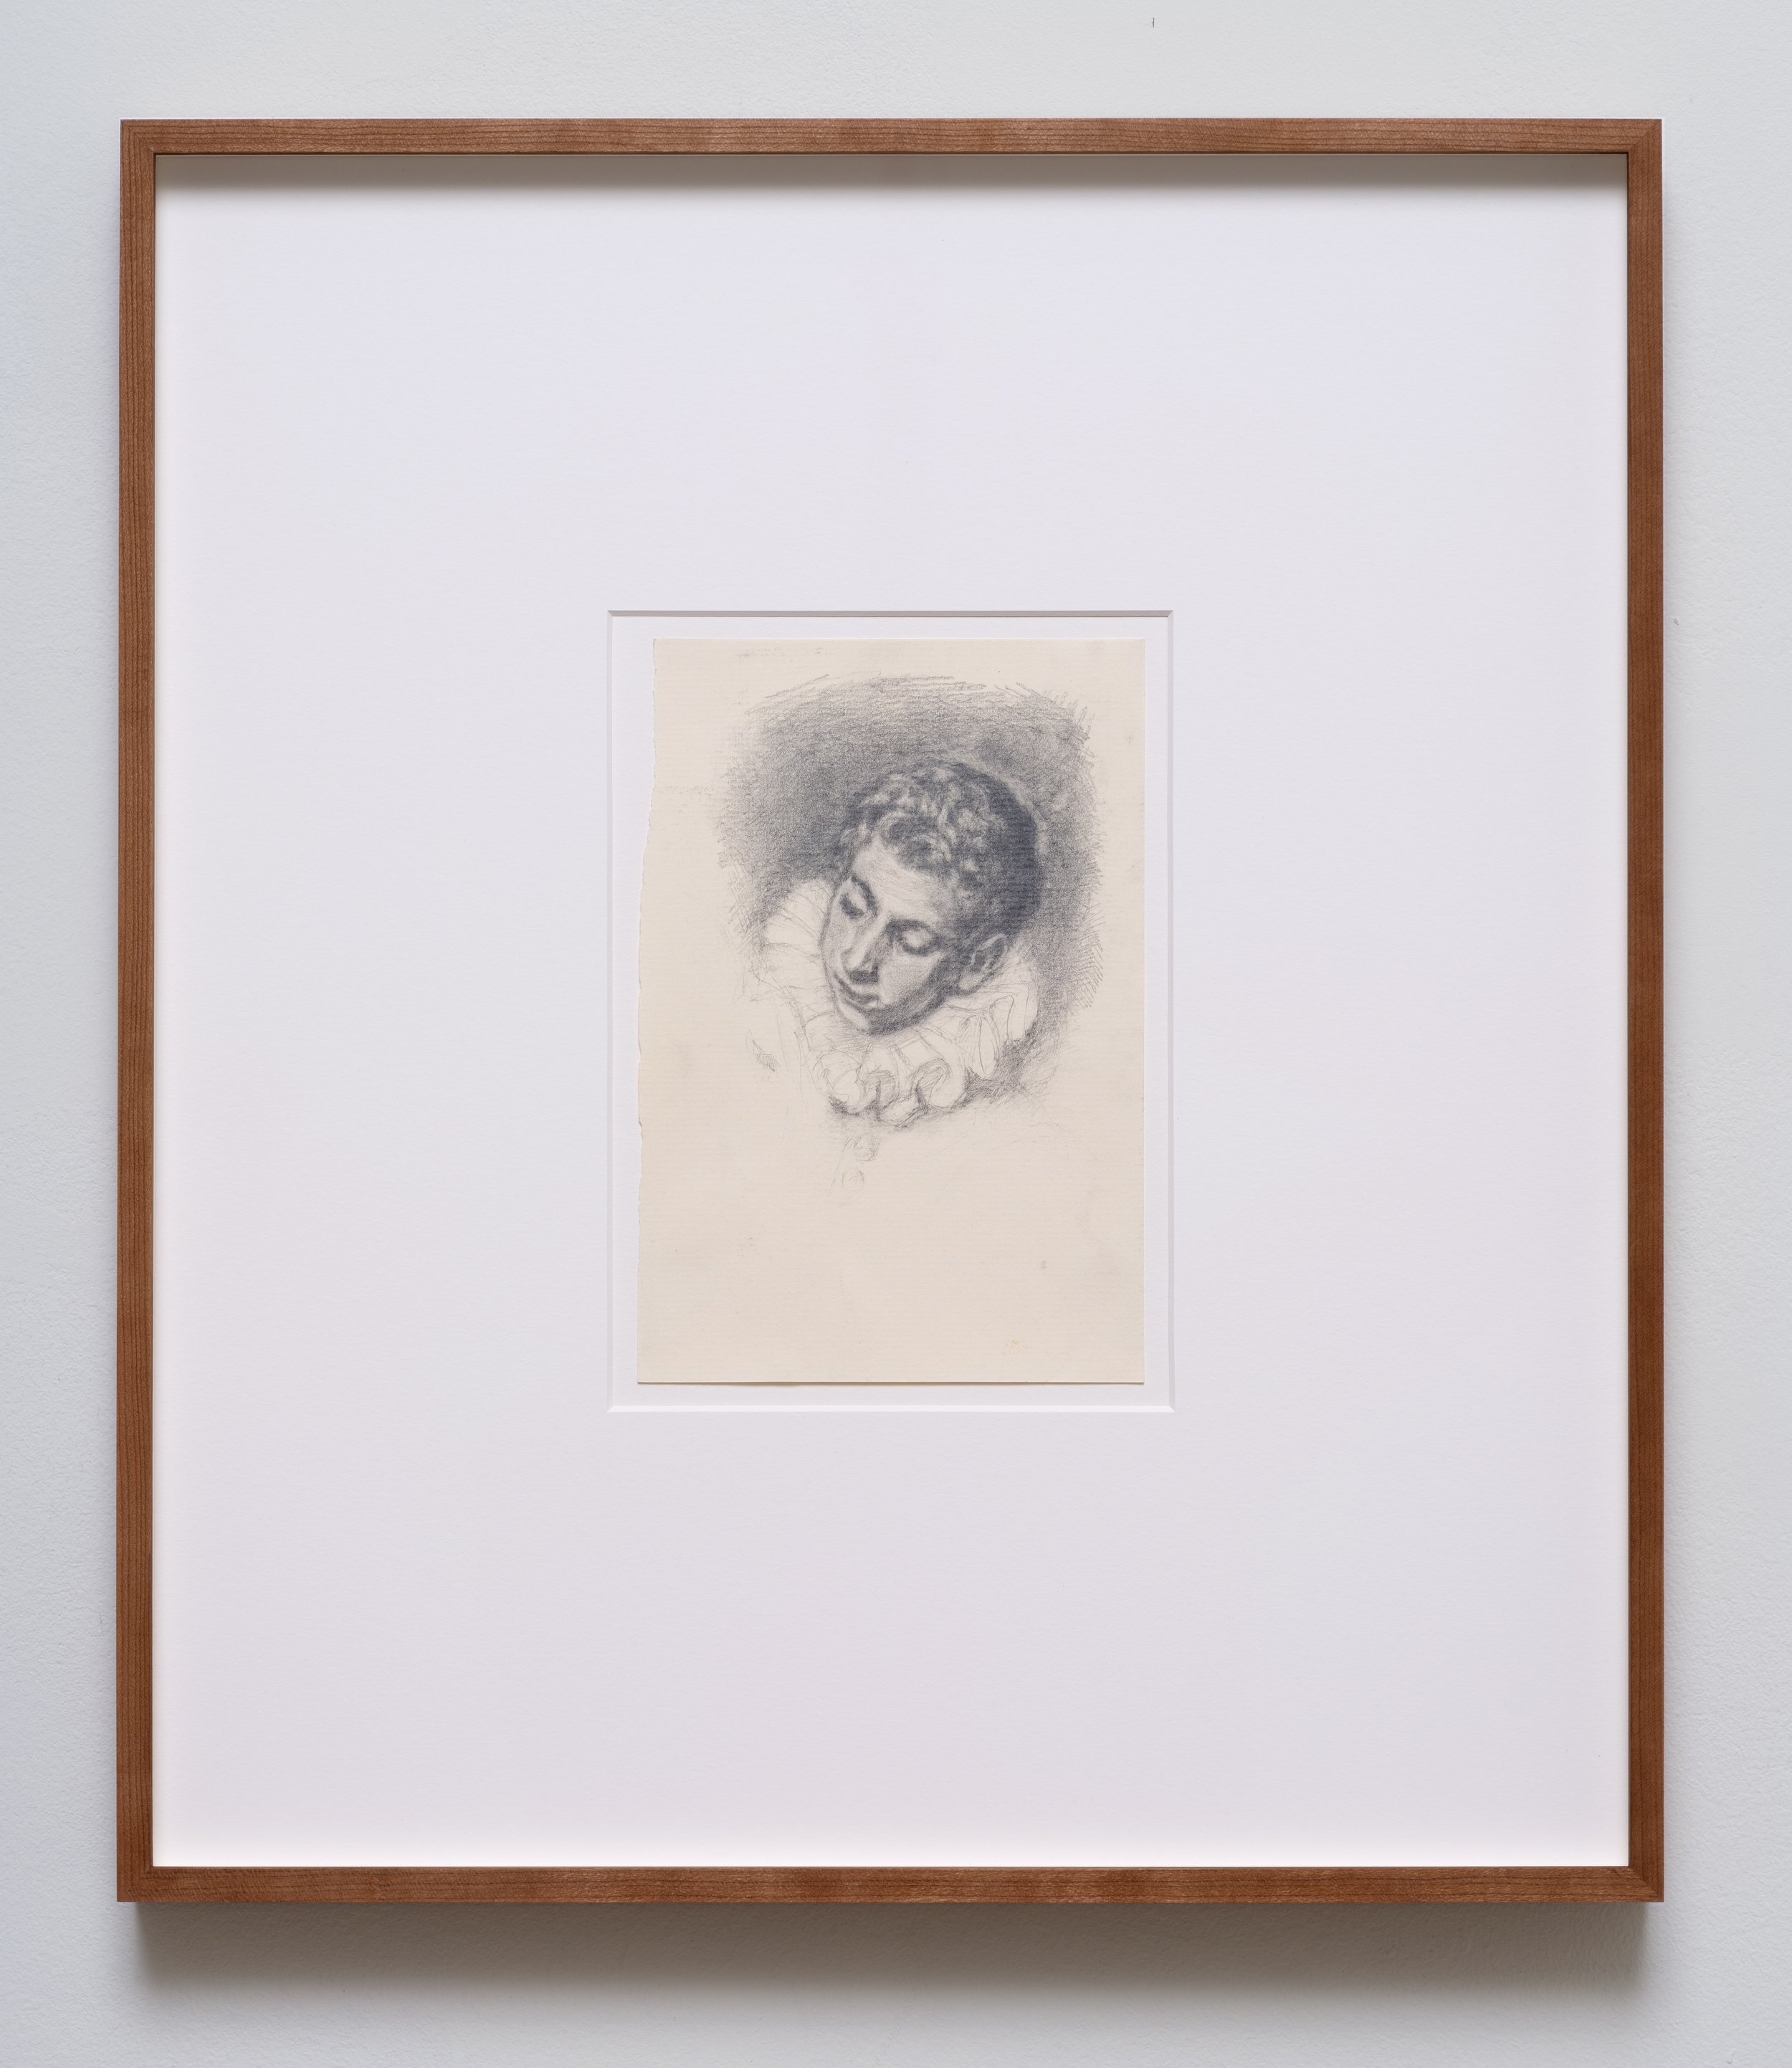   After El Greco, Louvre , 2012 Graphite on paper 19 1/2 x 17 x 1 1/2 inches (framed)&nbsp; 